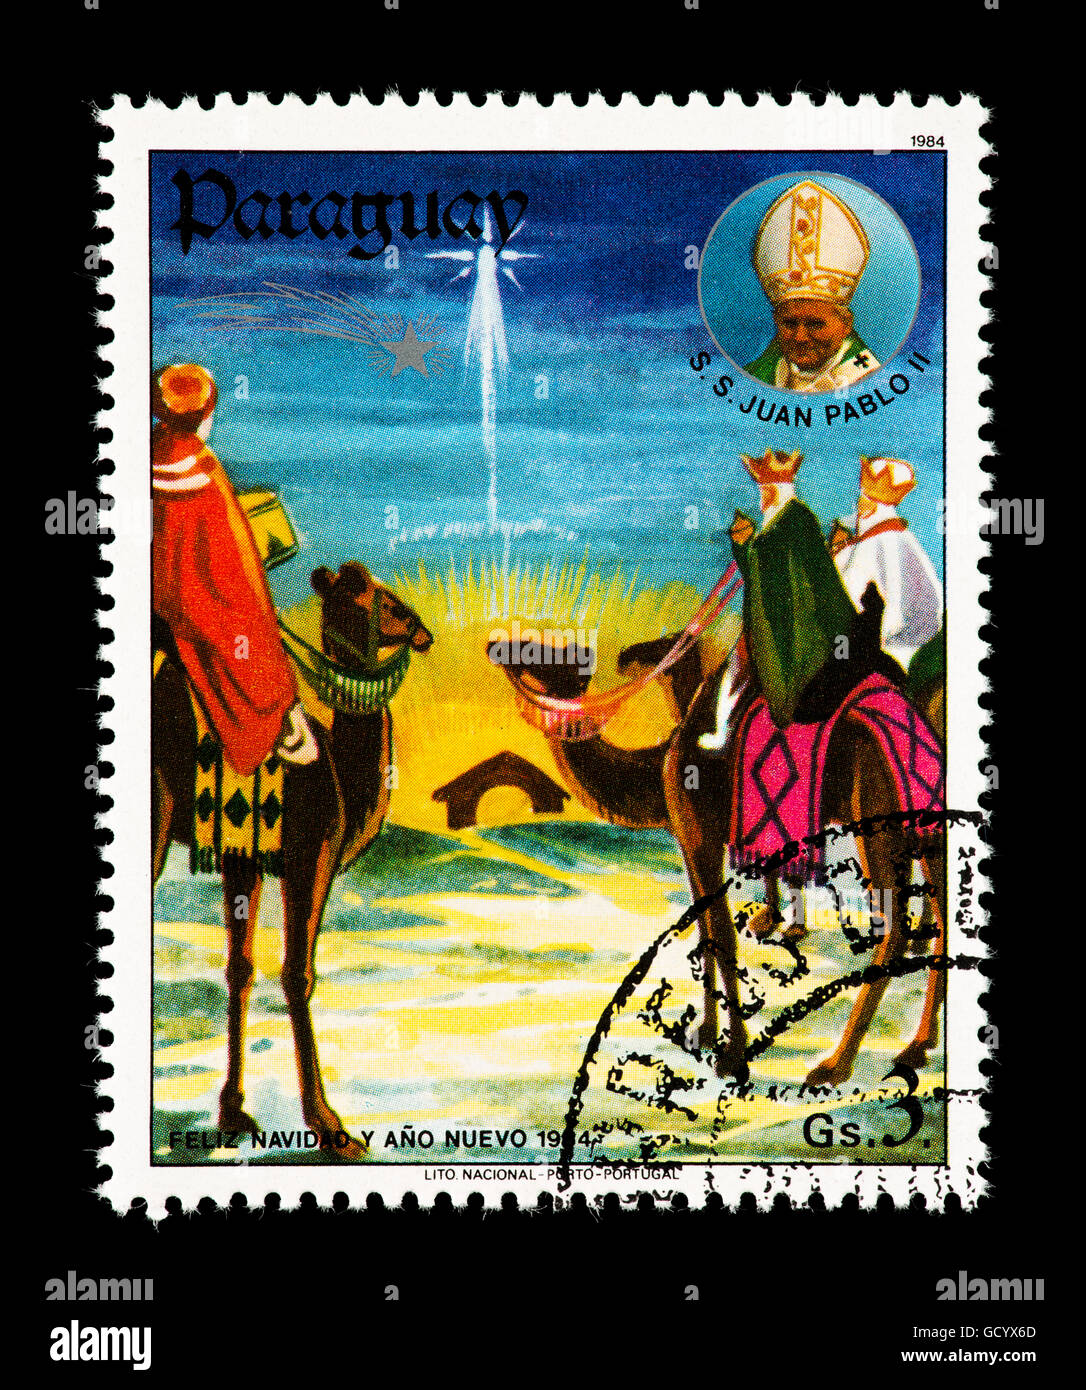 Postage stamp from Paraguay depicting the three wise men following a star to see Jesus. Stock Photo